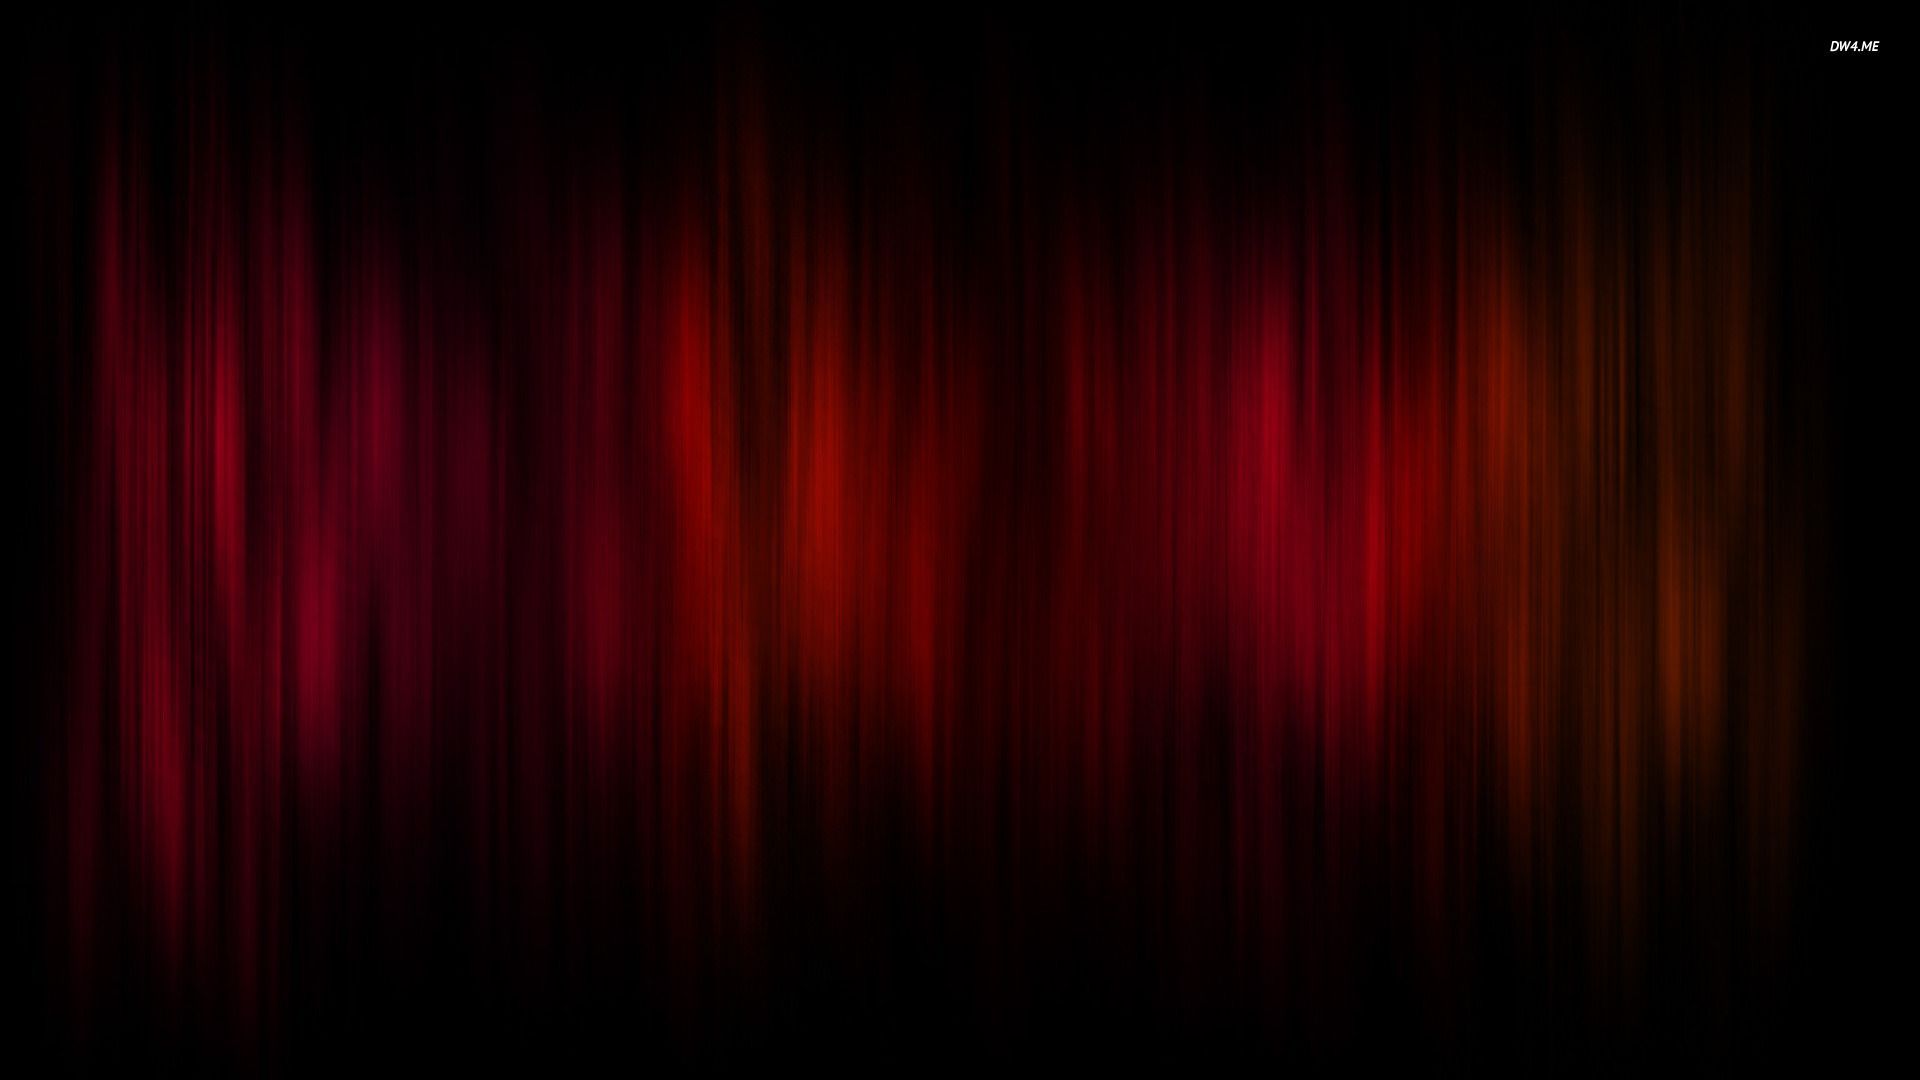 Black and Red Abstract Cool Wallpaper 464 - Amazing Wallpaperz